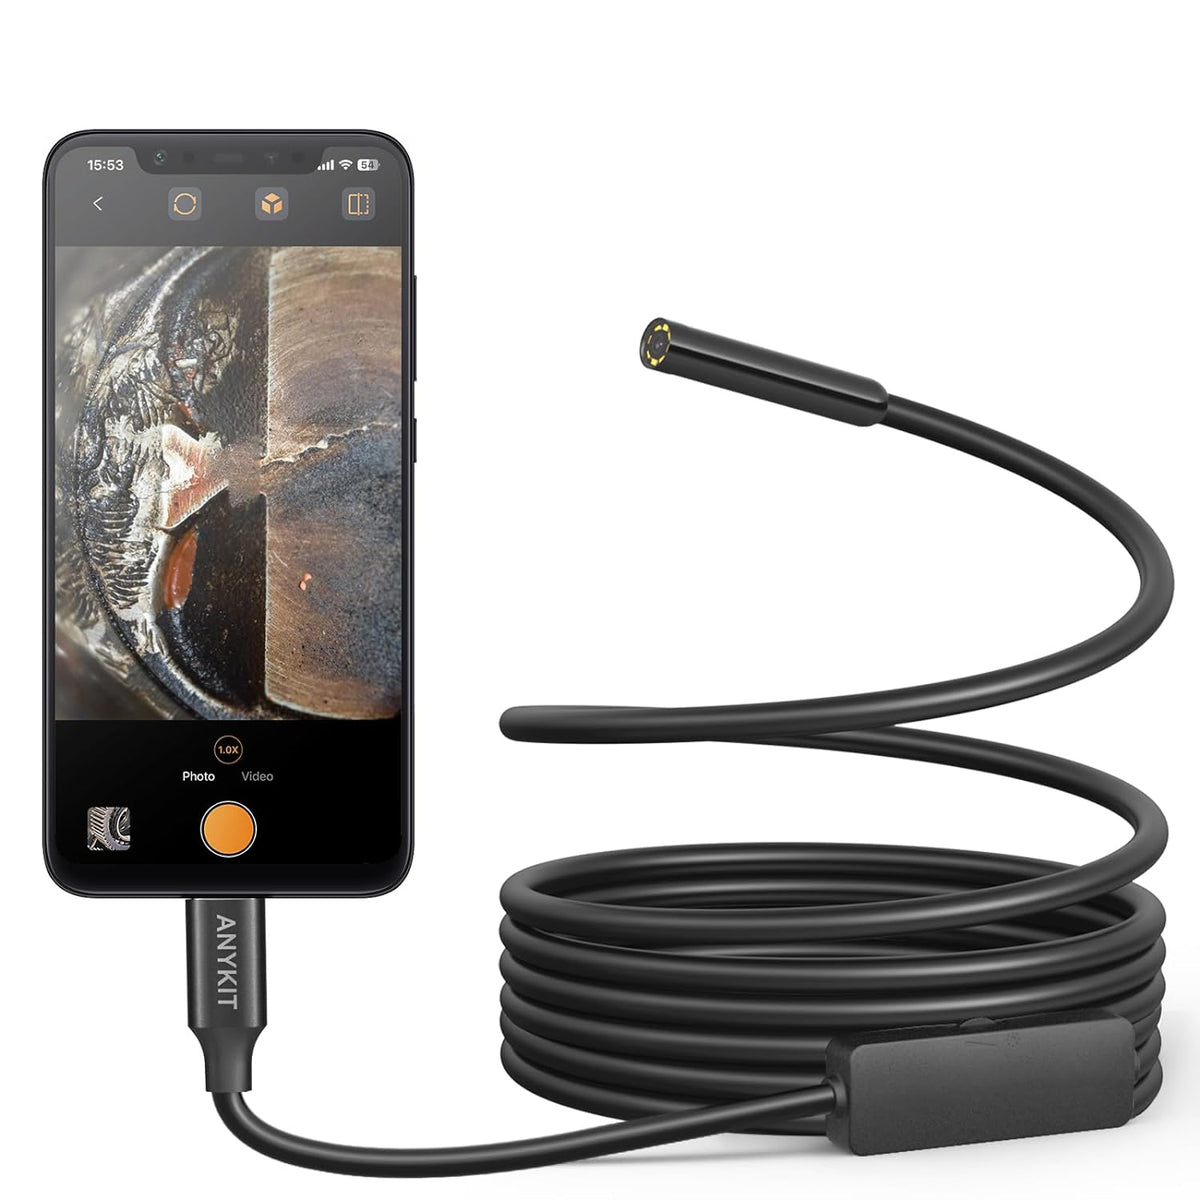 Endoscope Camera with Light, 1080P 1.0MP Borescope with 8 LED Lights, USB Endoscope with 3.3ft Semi-Rigid Snake Camera, IP67 Waterproof Inspection Camera for iPhone, iPad, OTG Android Phone